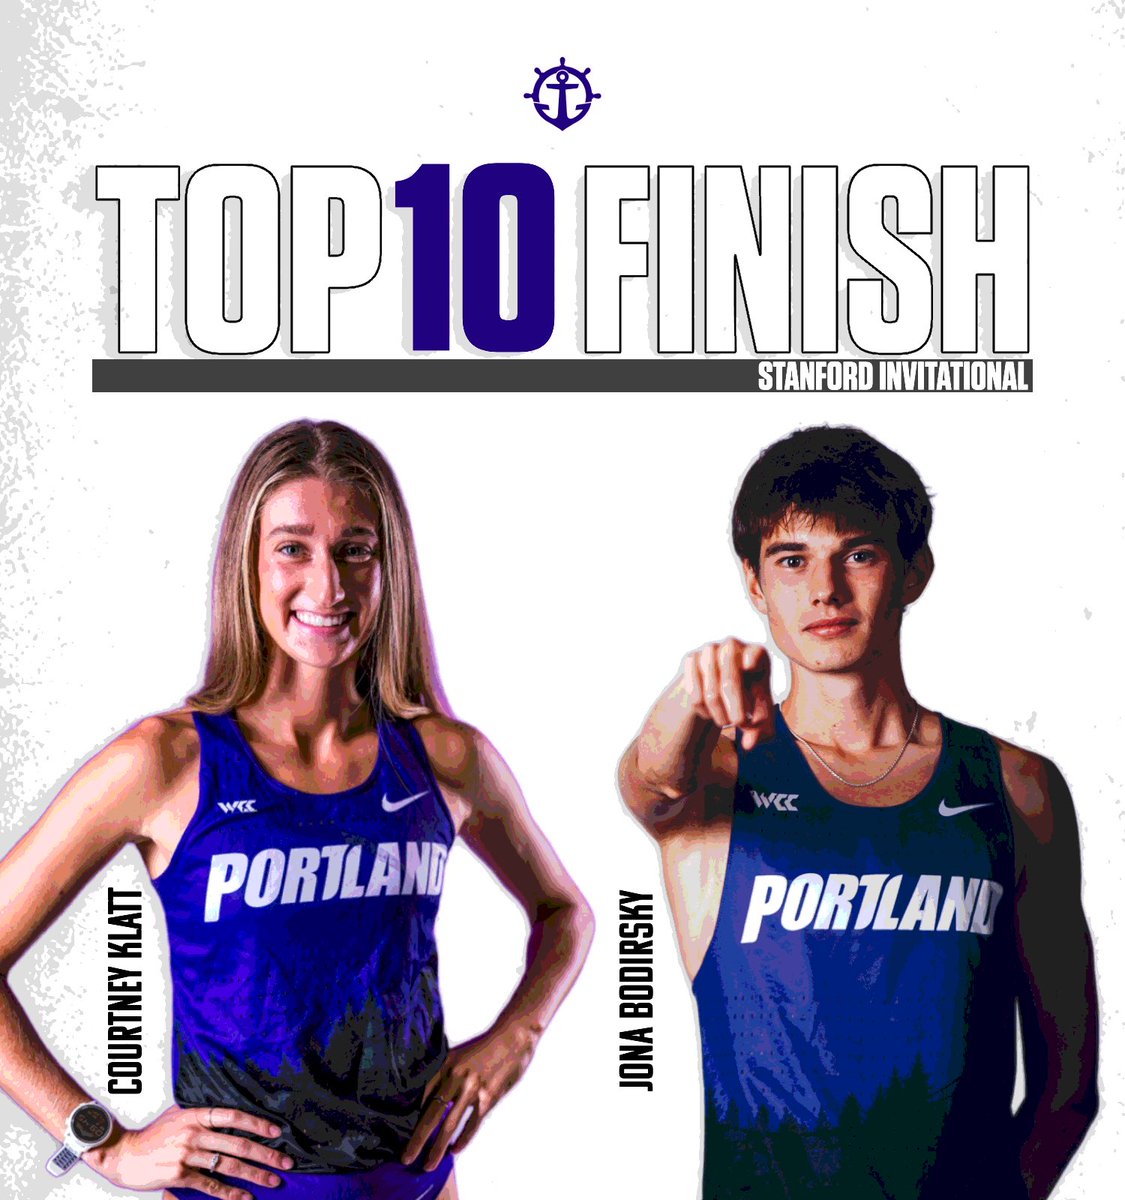 What a day for the Pilots! 🙌 Marlee Cavitt sets another program record in the 100m! 🔥 Courtney Klatt finished 10th in the 5K (16:23.25) and Jona Bodirsky 6th in the 10k (28:39.73)! 👏 #gopilots